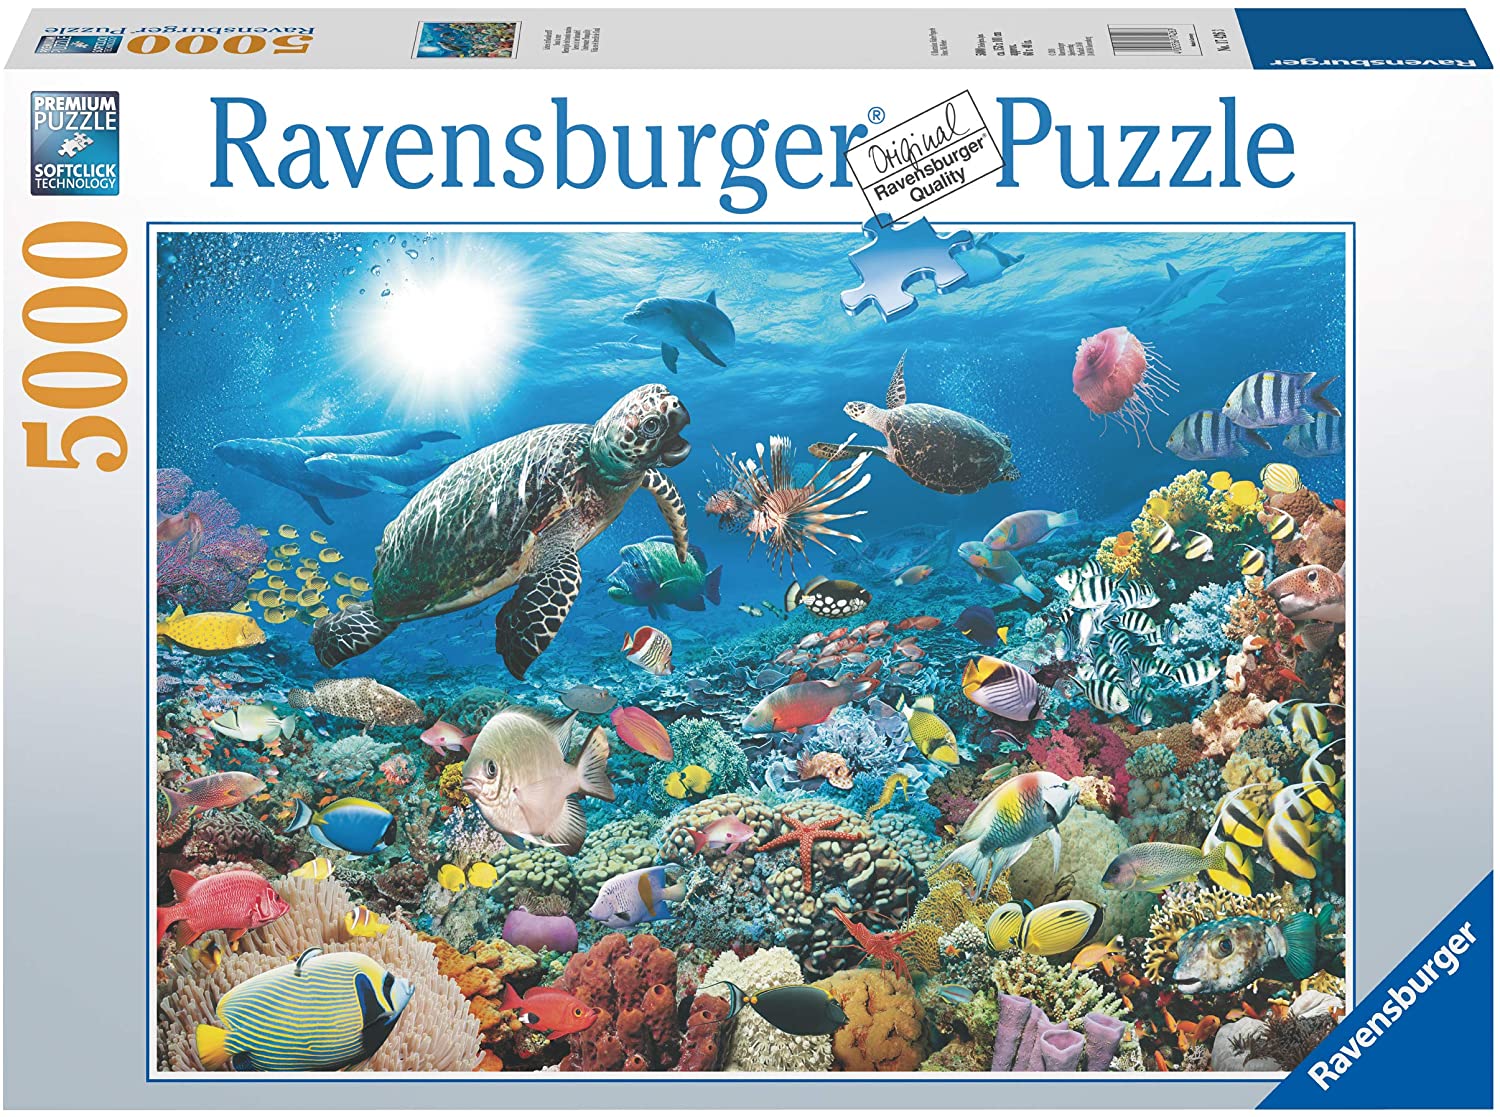 Prosecute So-called Stereotype Ravensburger Underwater Tranquility 5000 Piece Puzzle – The Puzzle  Collections